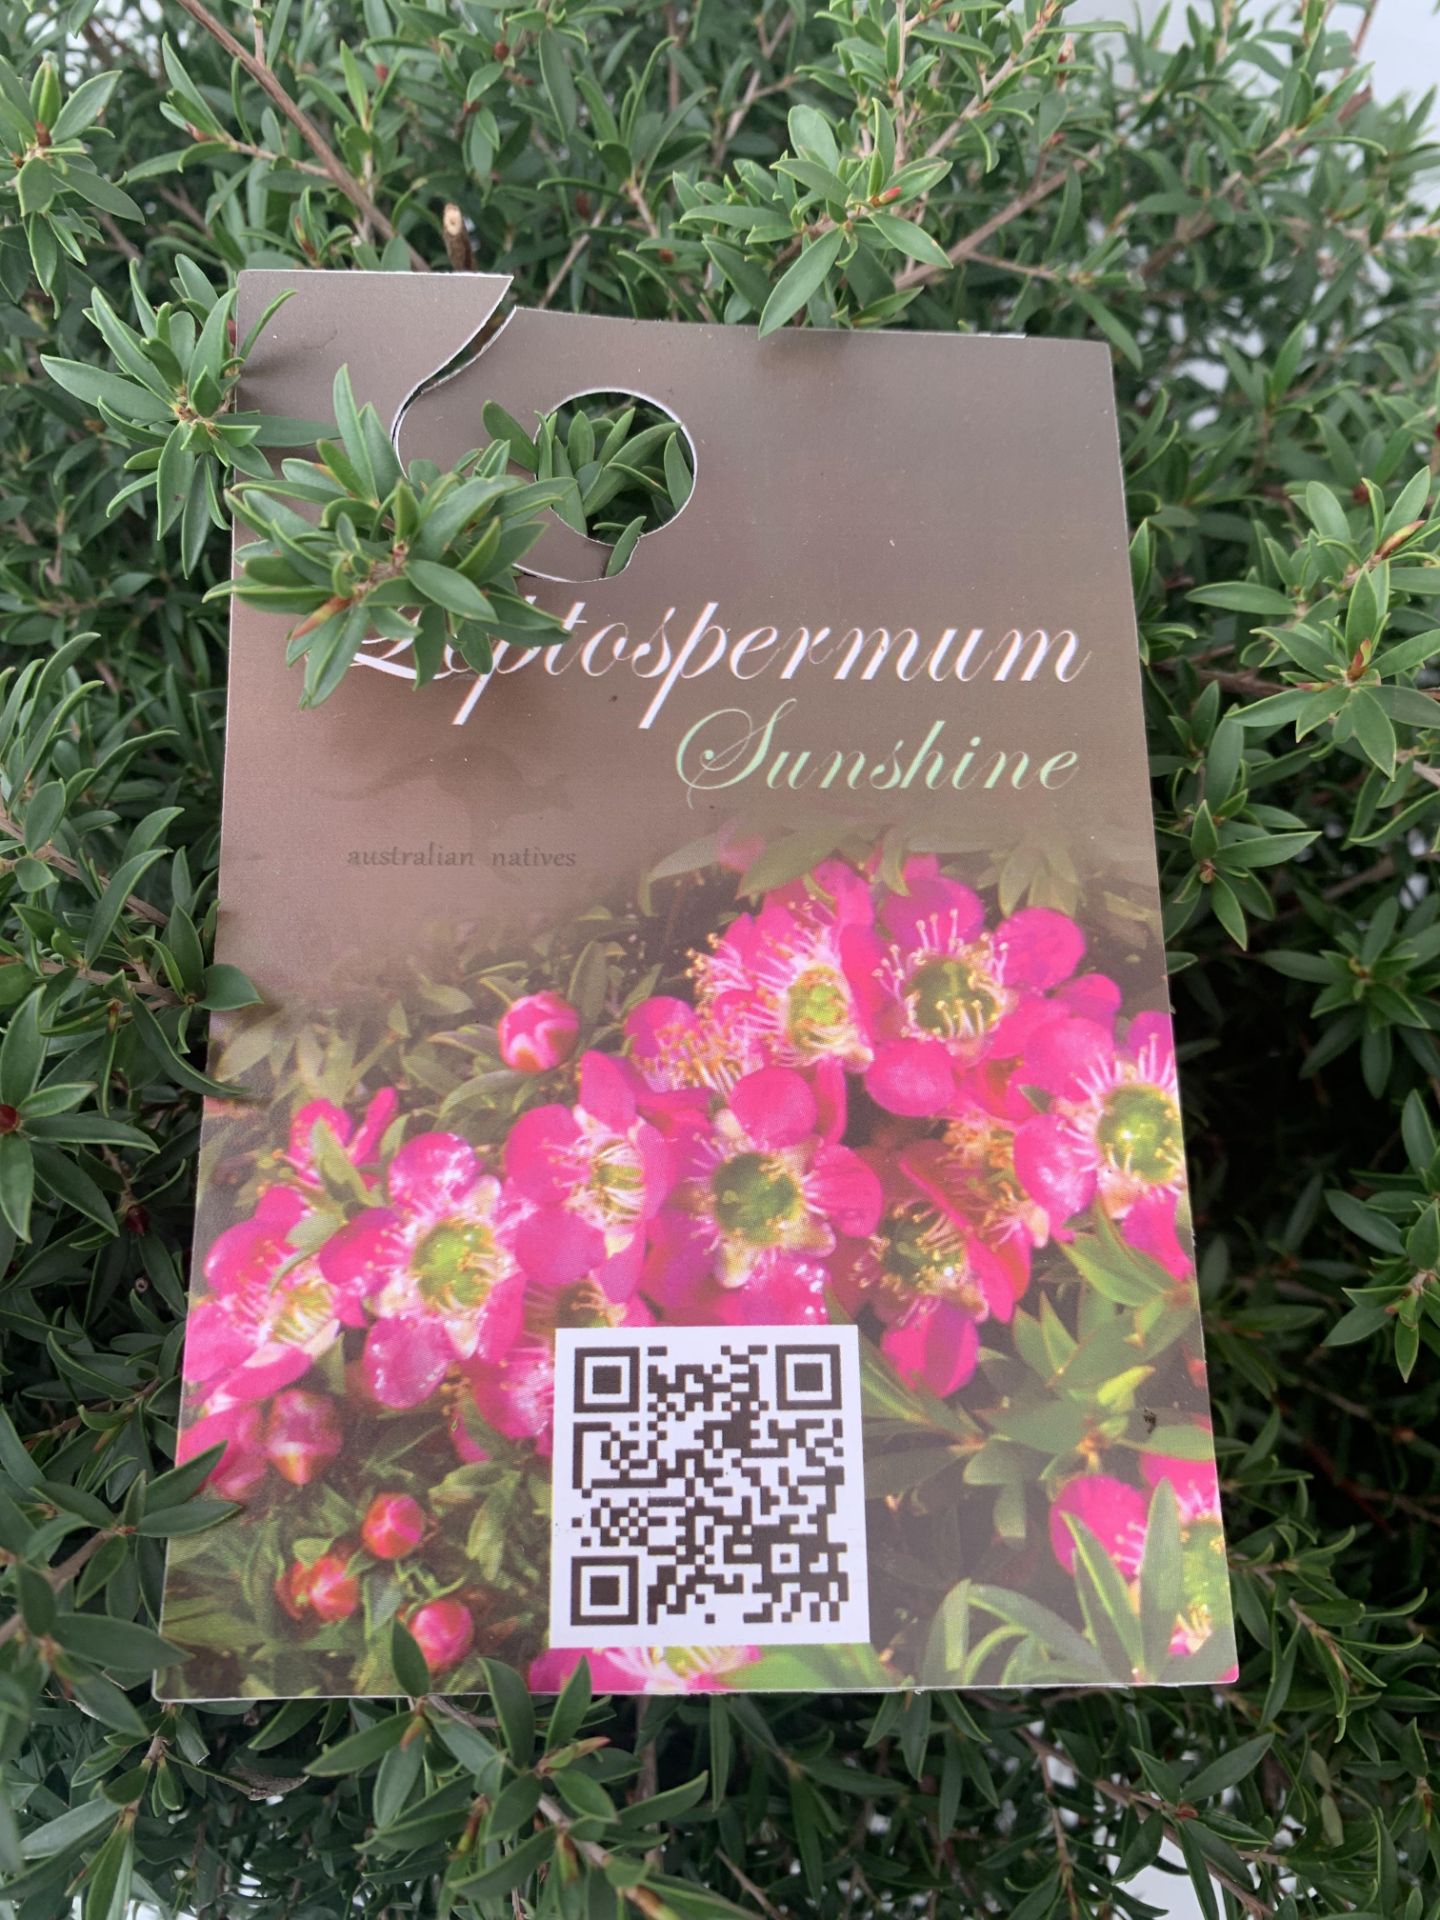 TWO LEPTOSPERMUM 'SUNSHINE' PINK SHRUBS APPROX 60CM IN HEIGHT IN FIVE LTR POTS PLUS VAT TO BE SOLD - Bild 7 aus 8